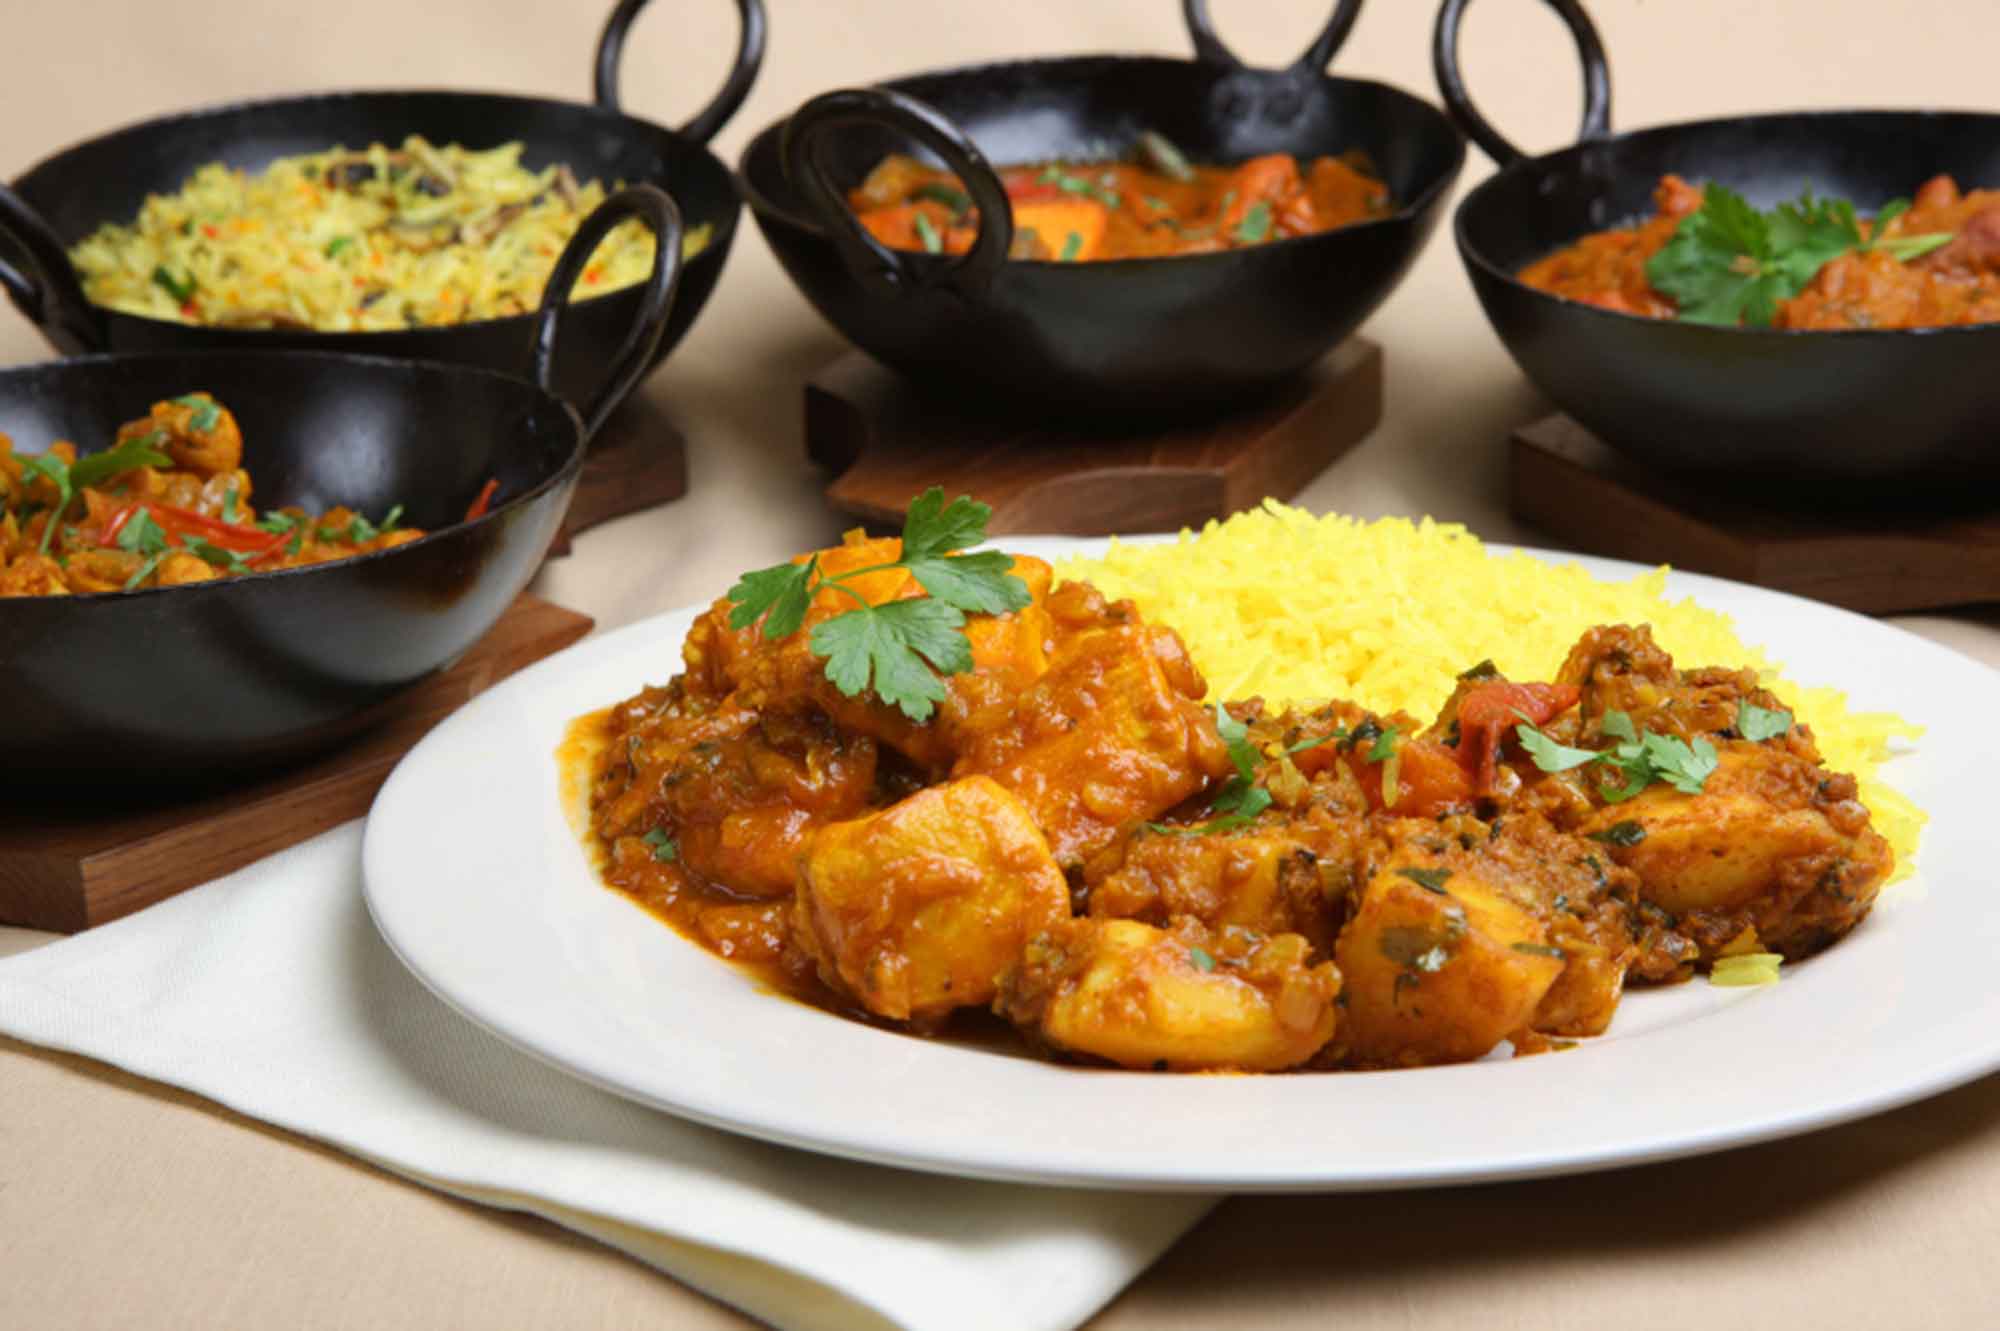 Search for Indian Take aways in and around Tonbridge